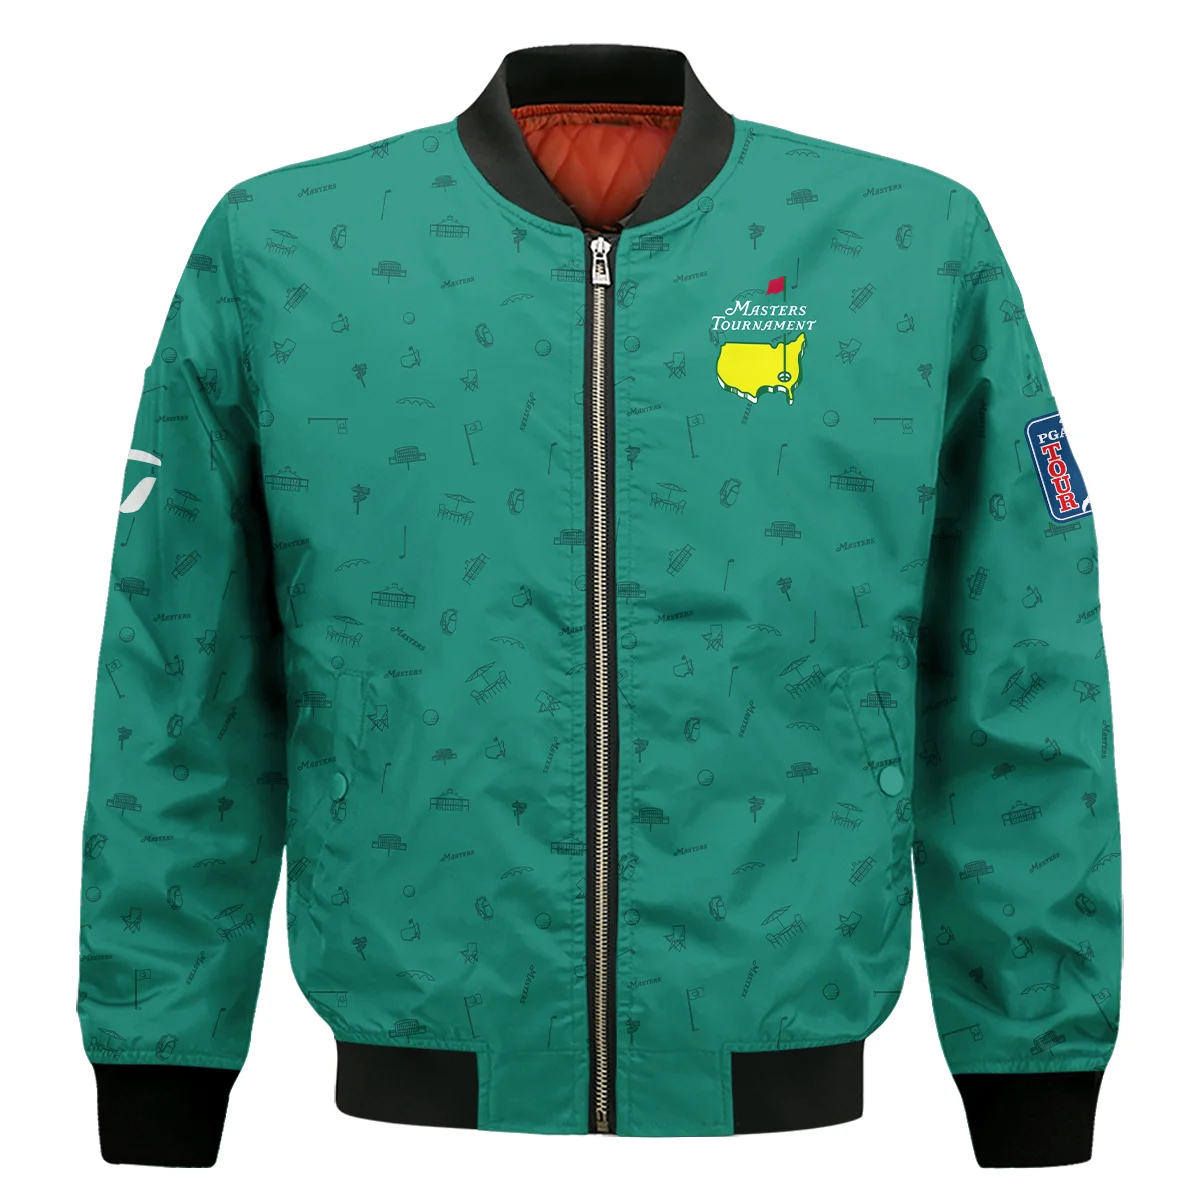 Golf Masters Tournament Taylor Made Bomber Jacket Augusta Icons Pattern Green Golf Sports Bomber Jacket GBJ1318